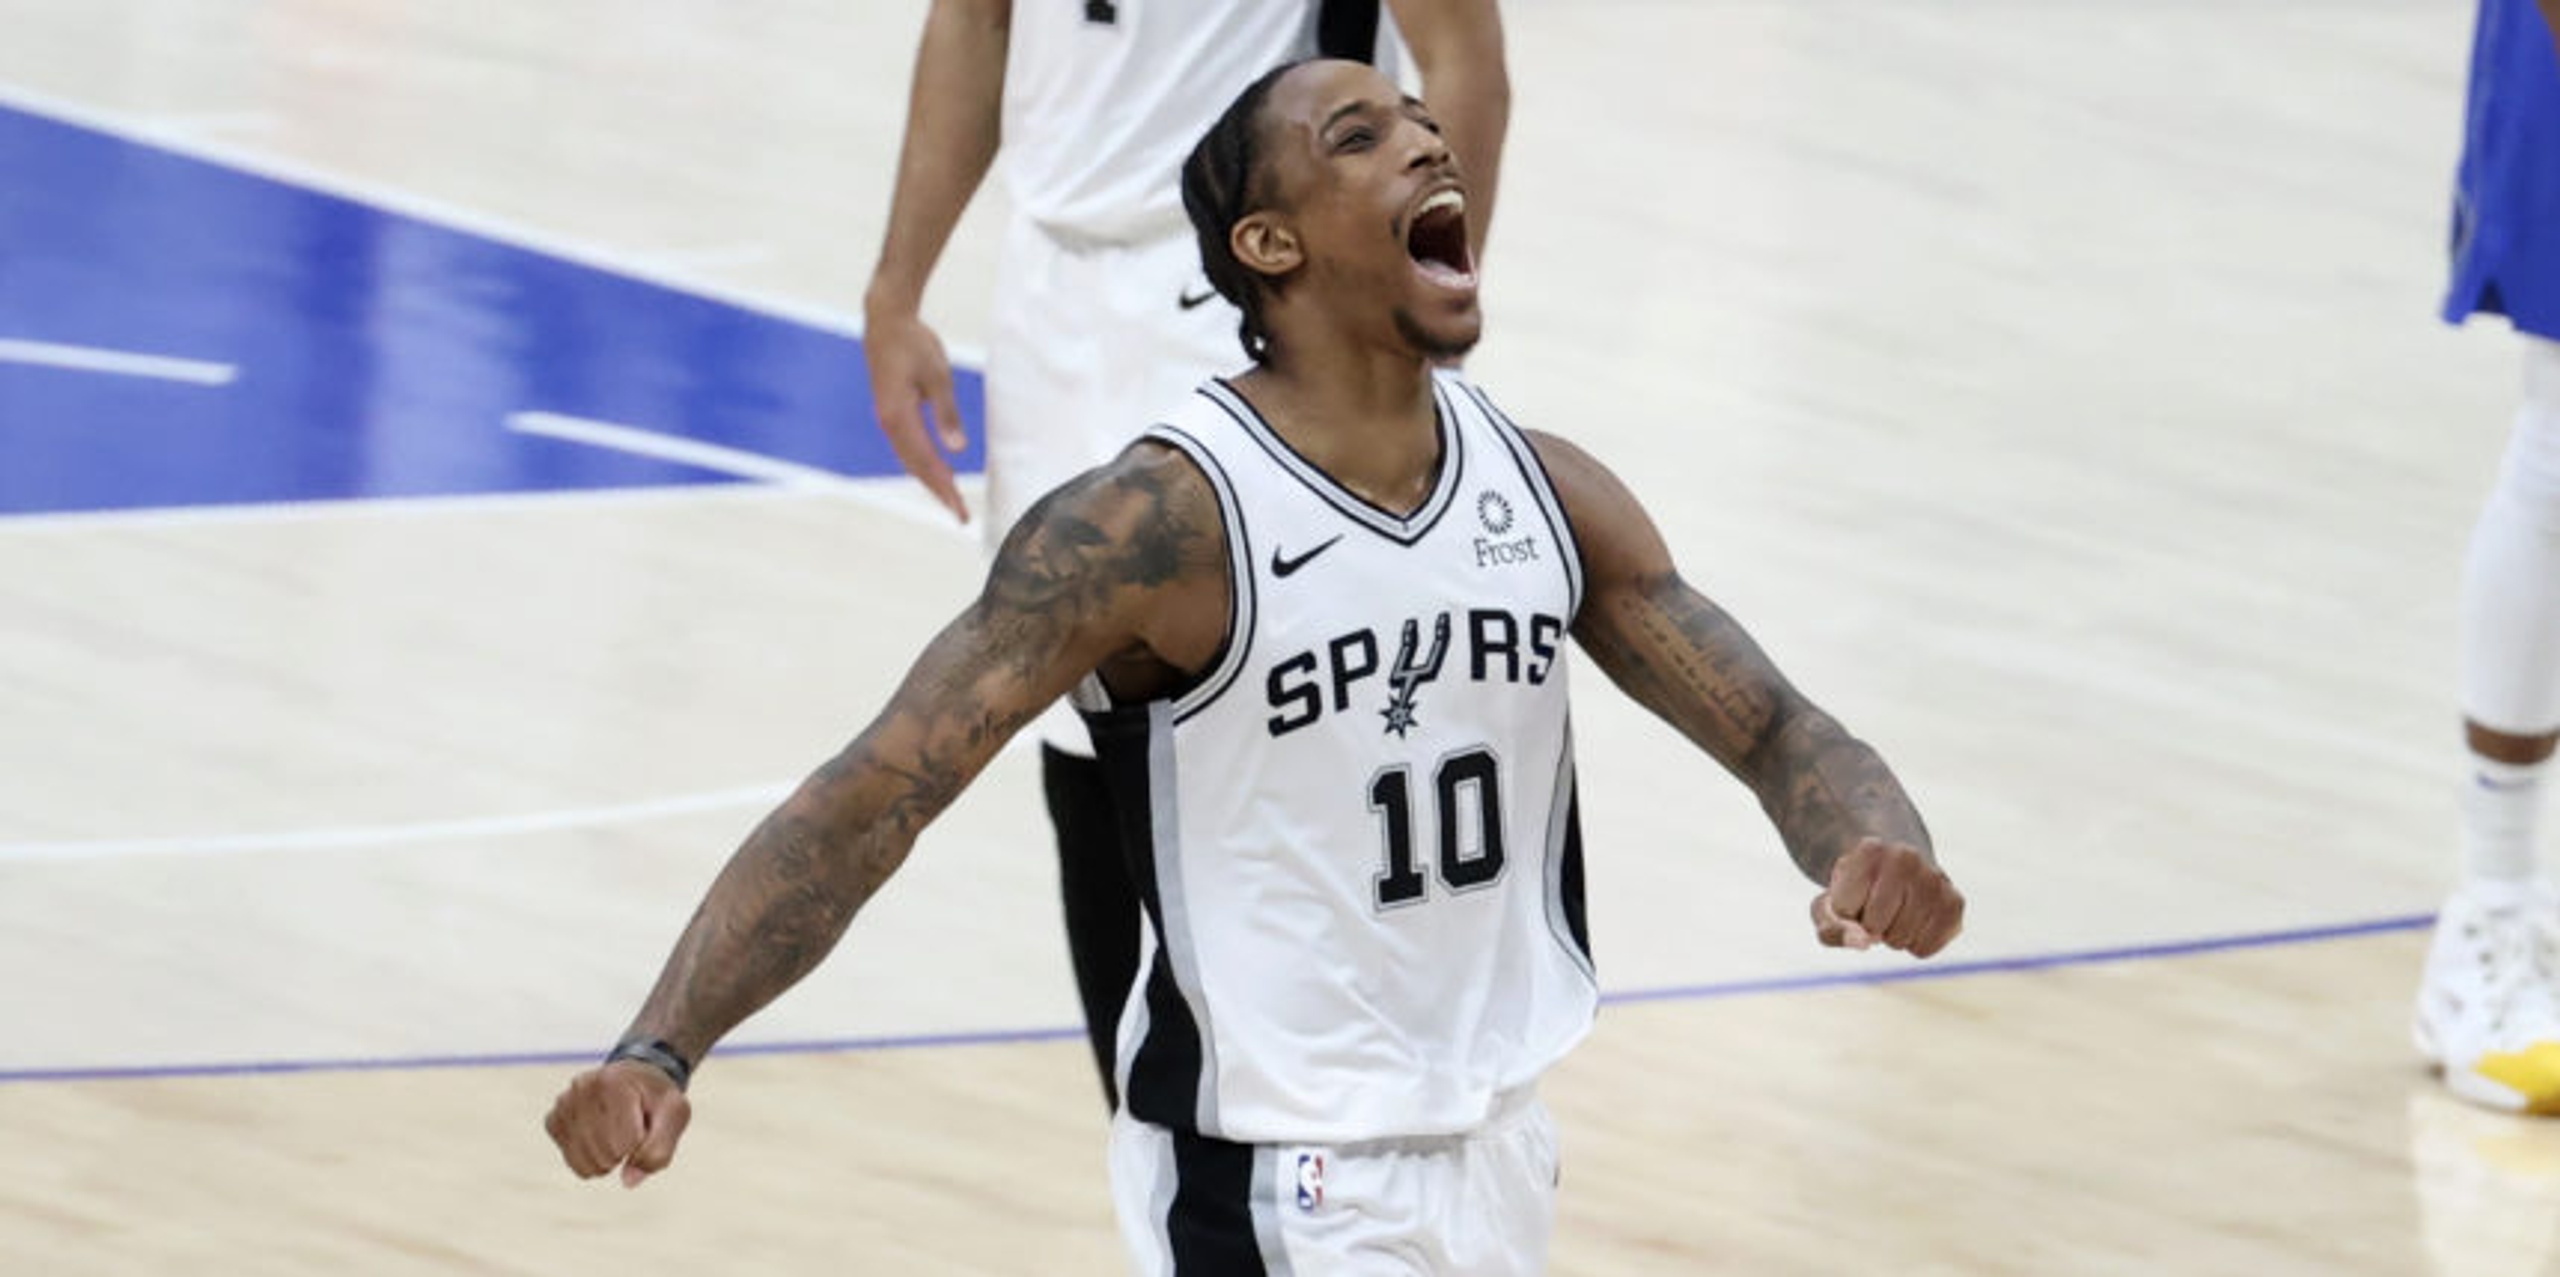 DeRozan ends Spurs' skid with late shot to beat Mavs 119-117